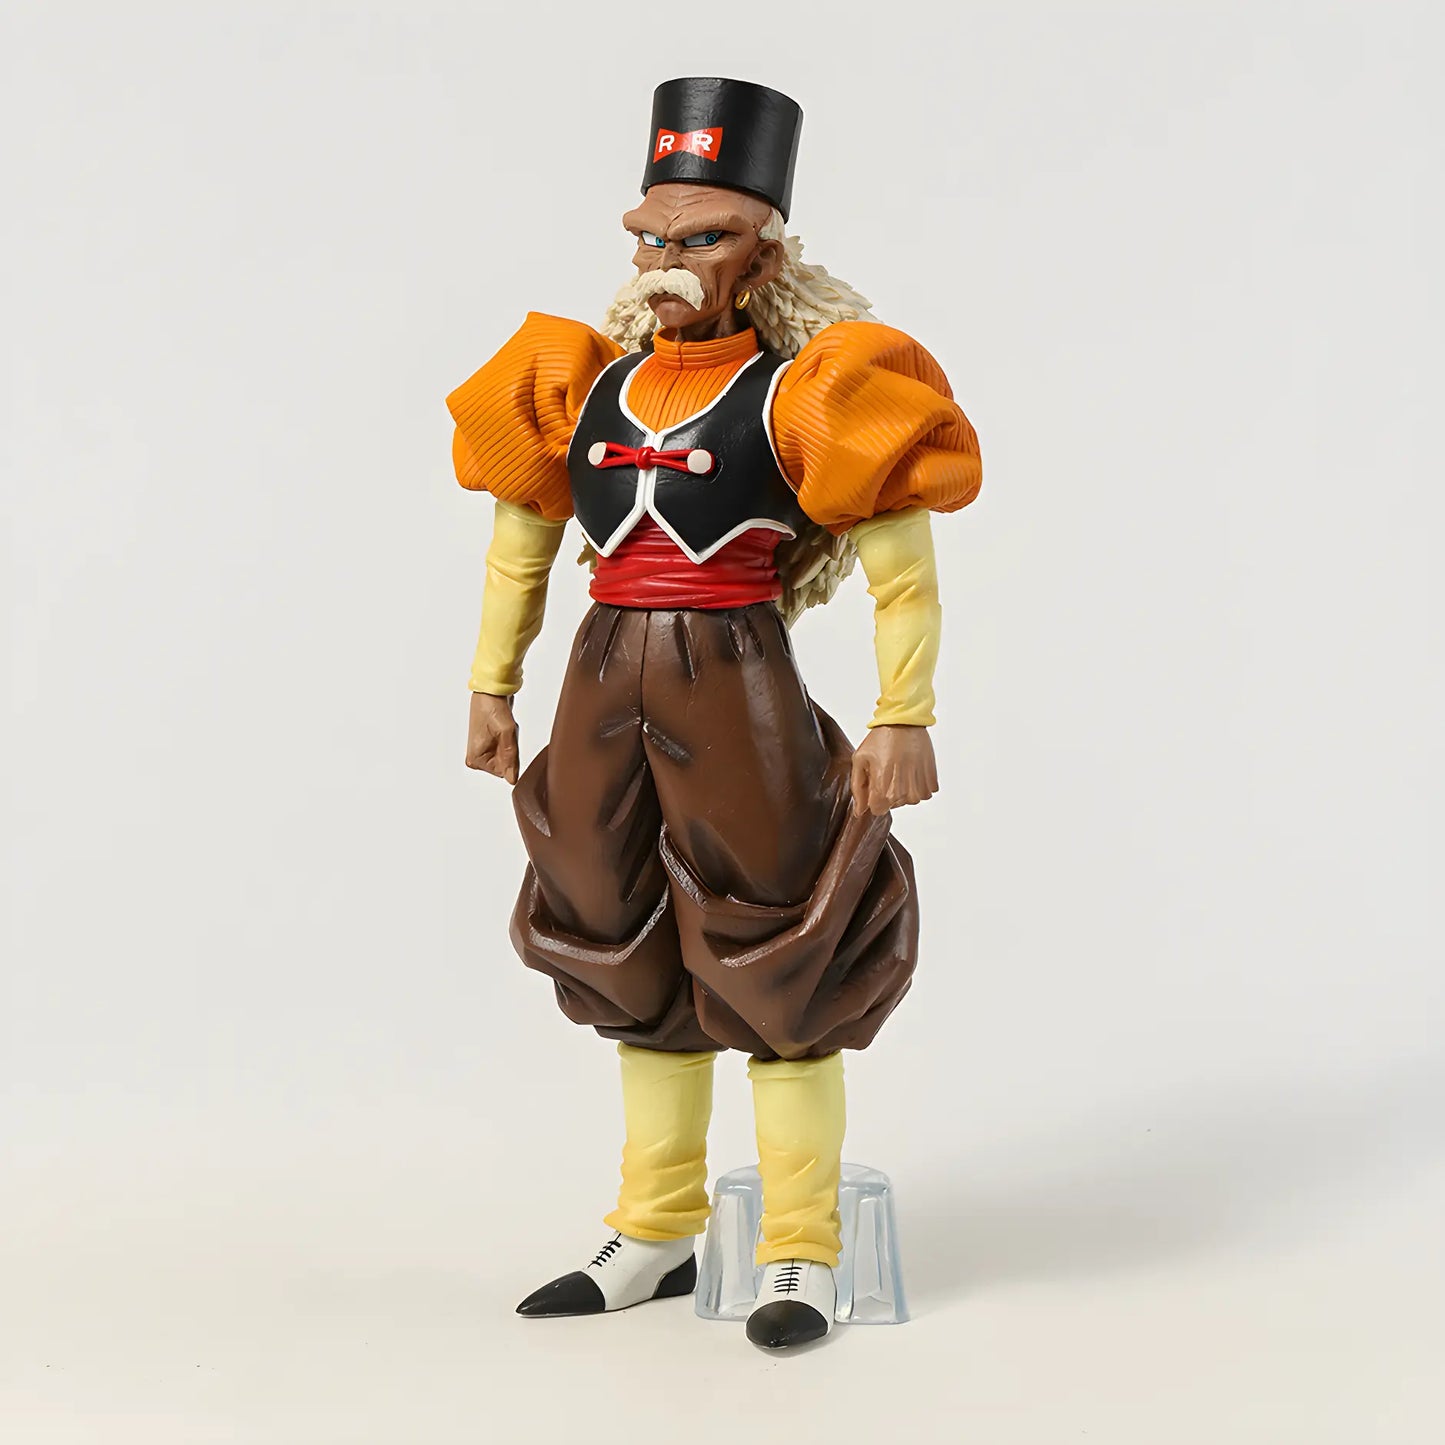 Android 20 from Dragon Ball as a collectible figure, posed with a serious expression, showcasing his detailed facial hair, earrings, and the Red Ribbon Army logo on his hat.